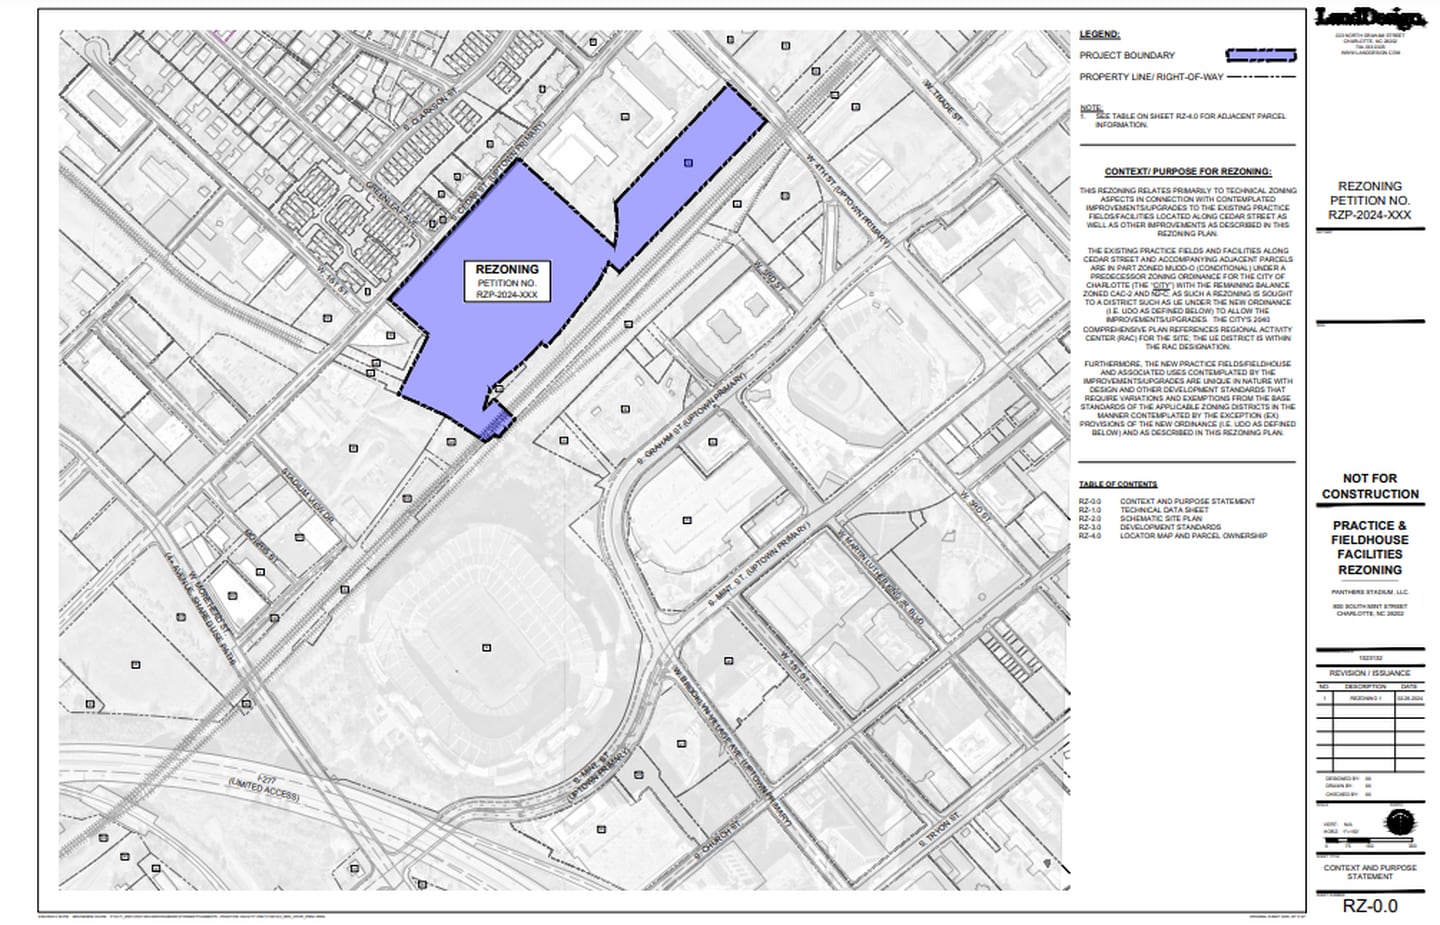 Panthers rezoning request for training facility